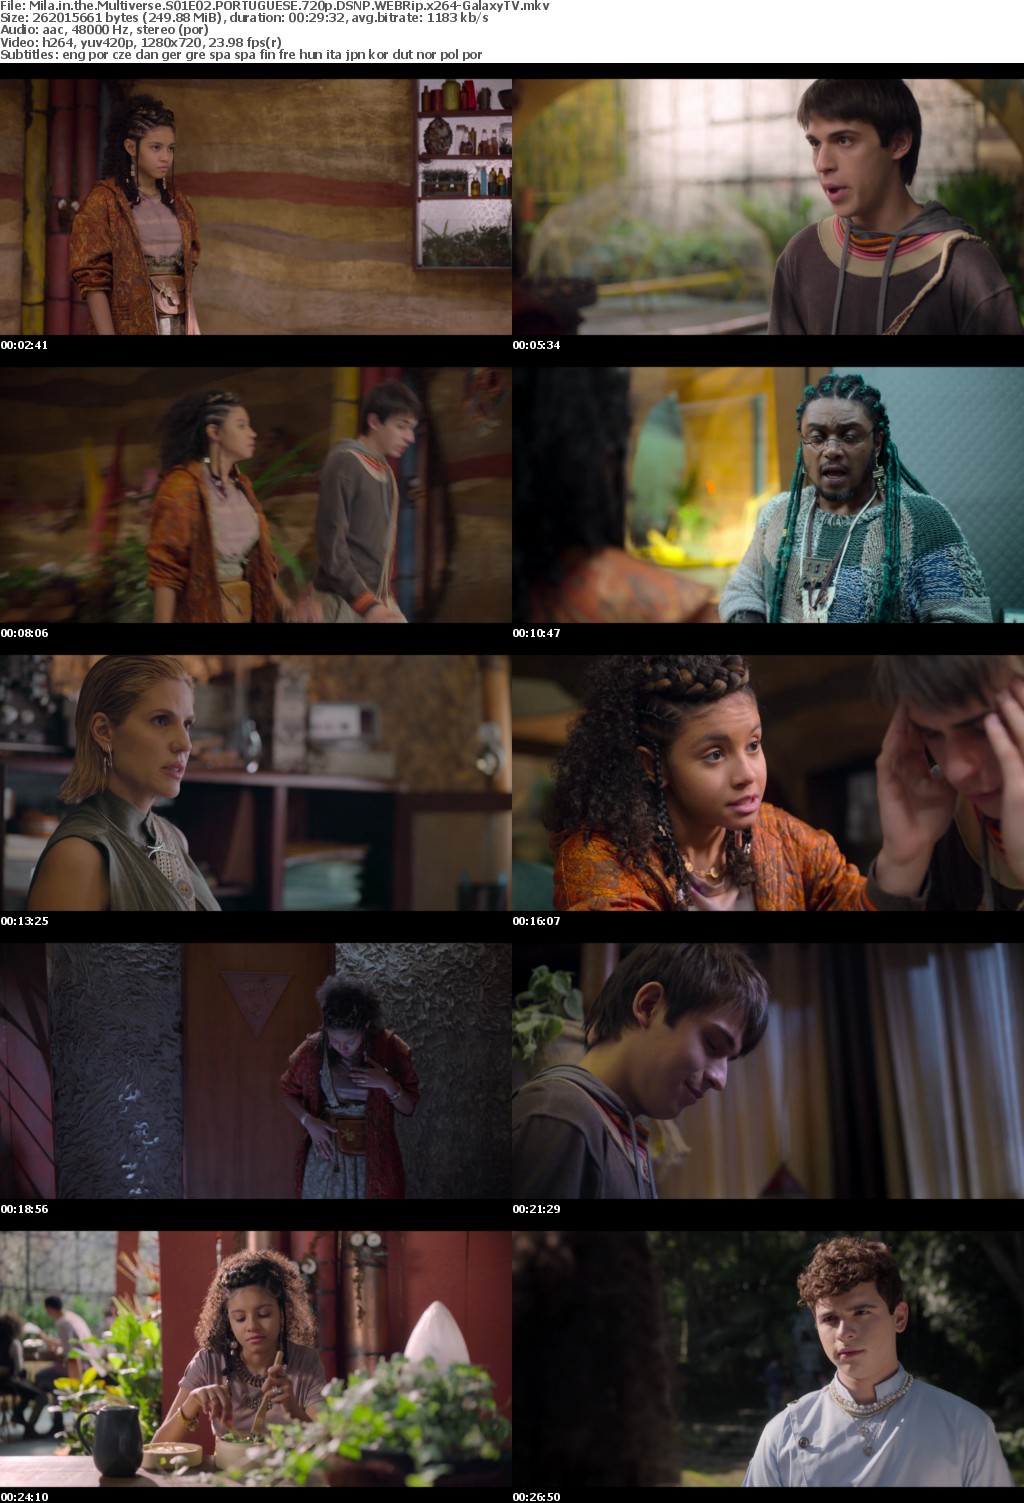 Mila in the Multiverse S01 COMPLETE PORTUGUESE 720p DSNP WEBRip x264-GalaxyTV